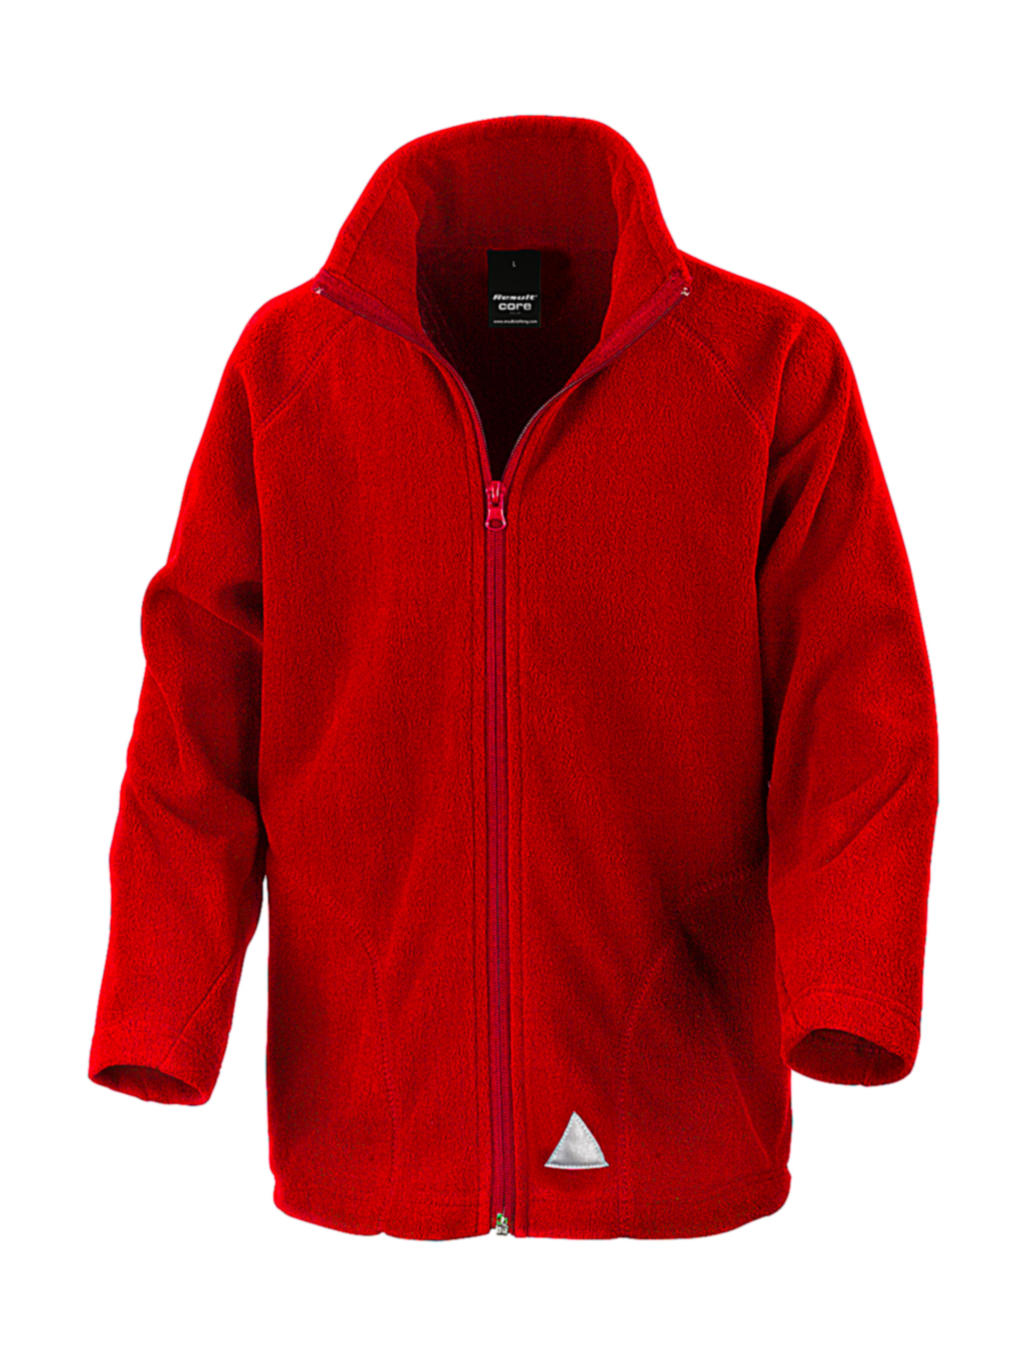  Junior/Youth Microfleece Top in Farbe Red